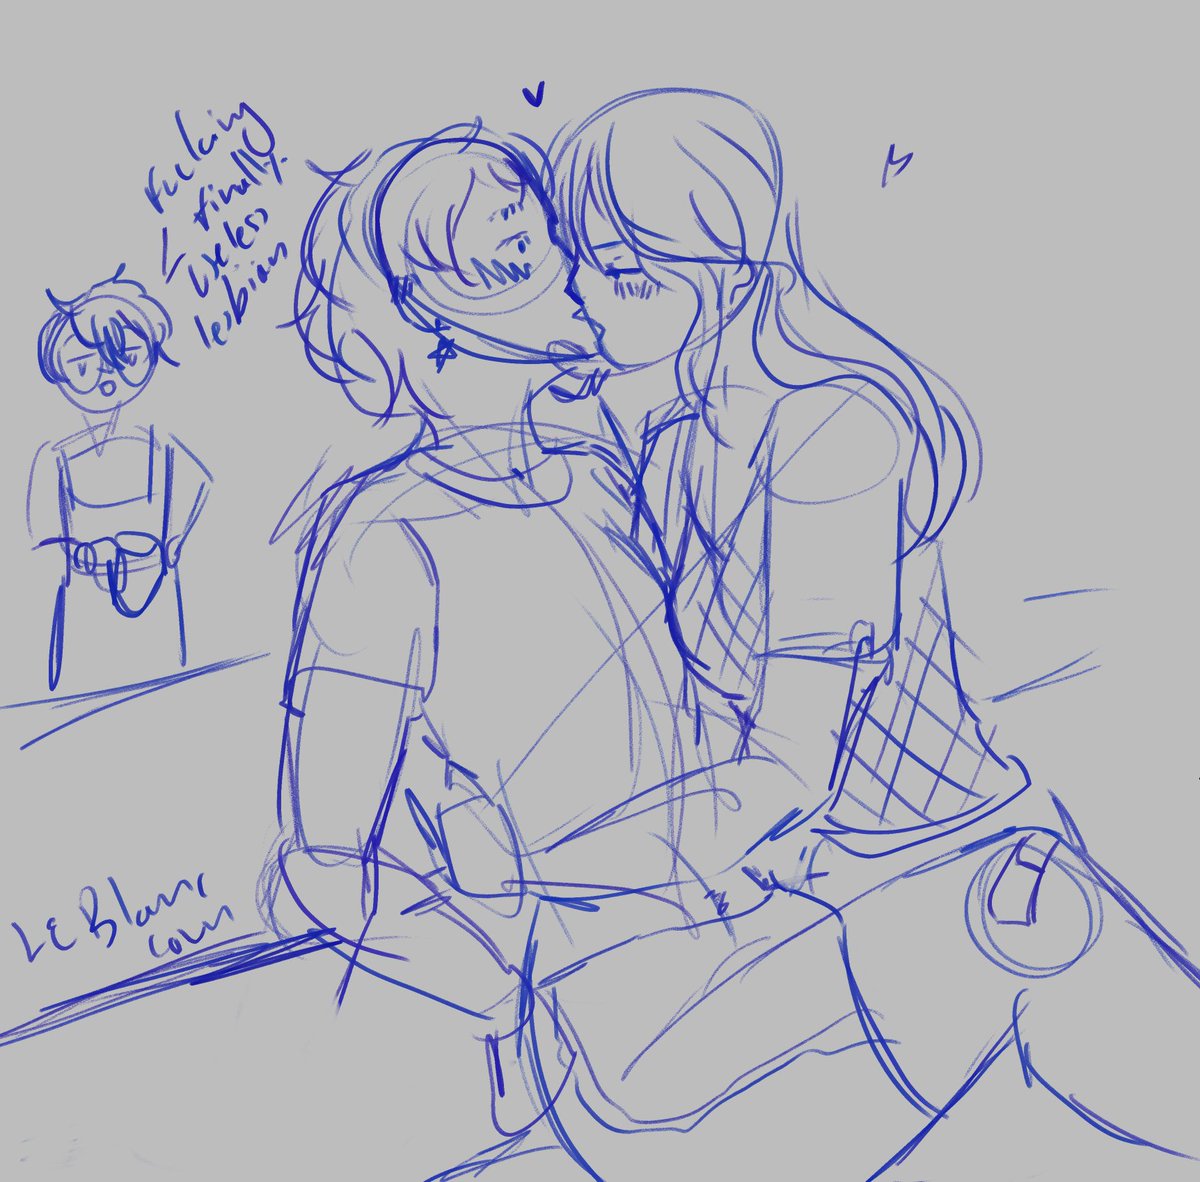 my fave ryugoro dynamic is when they're both girls, both very horny and very mad about it.